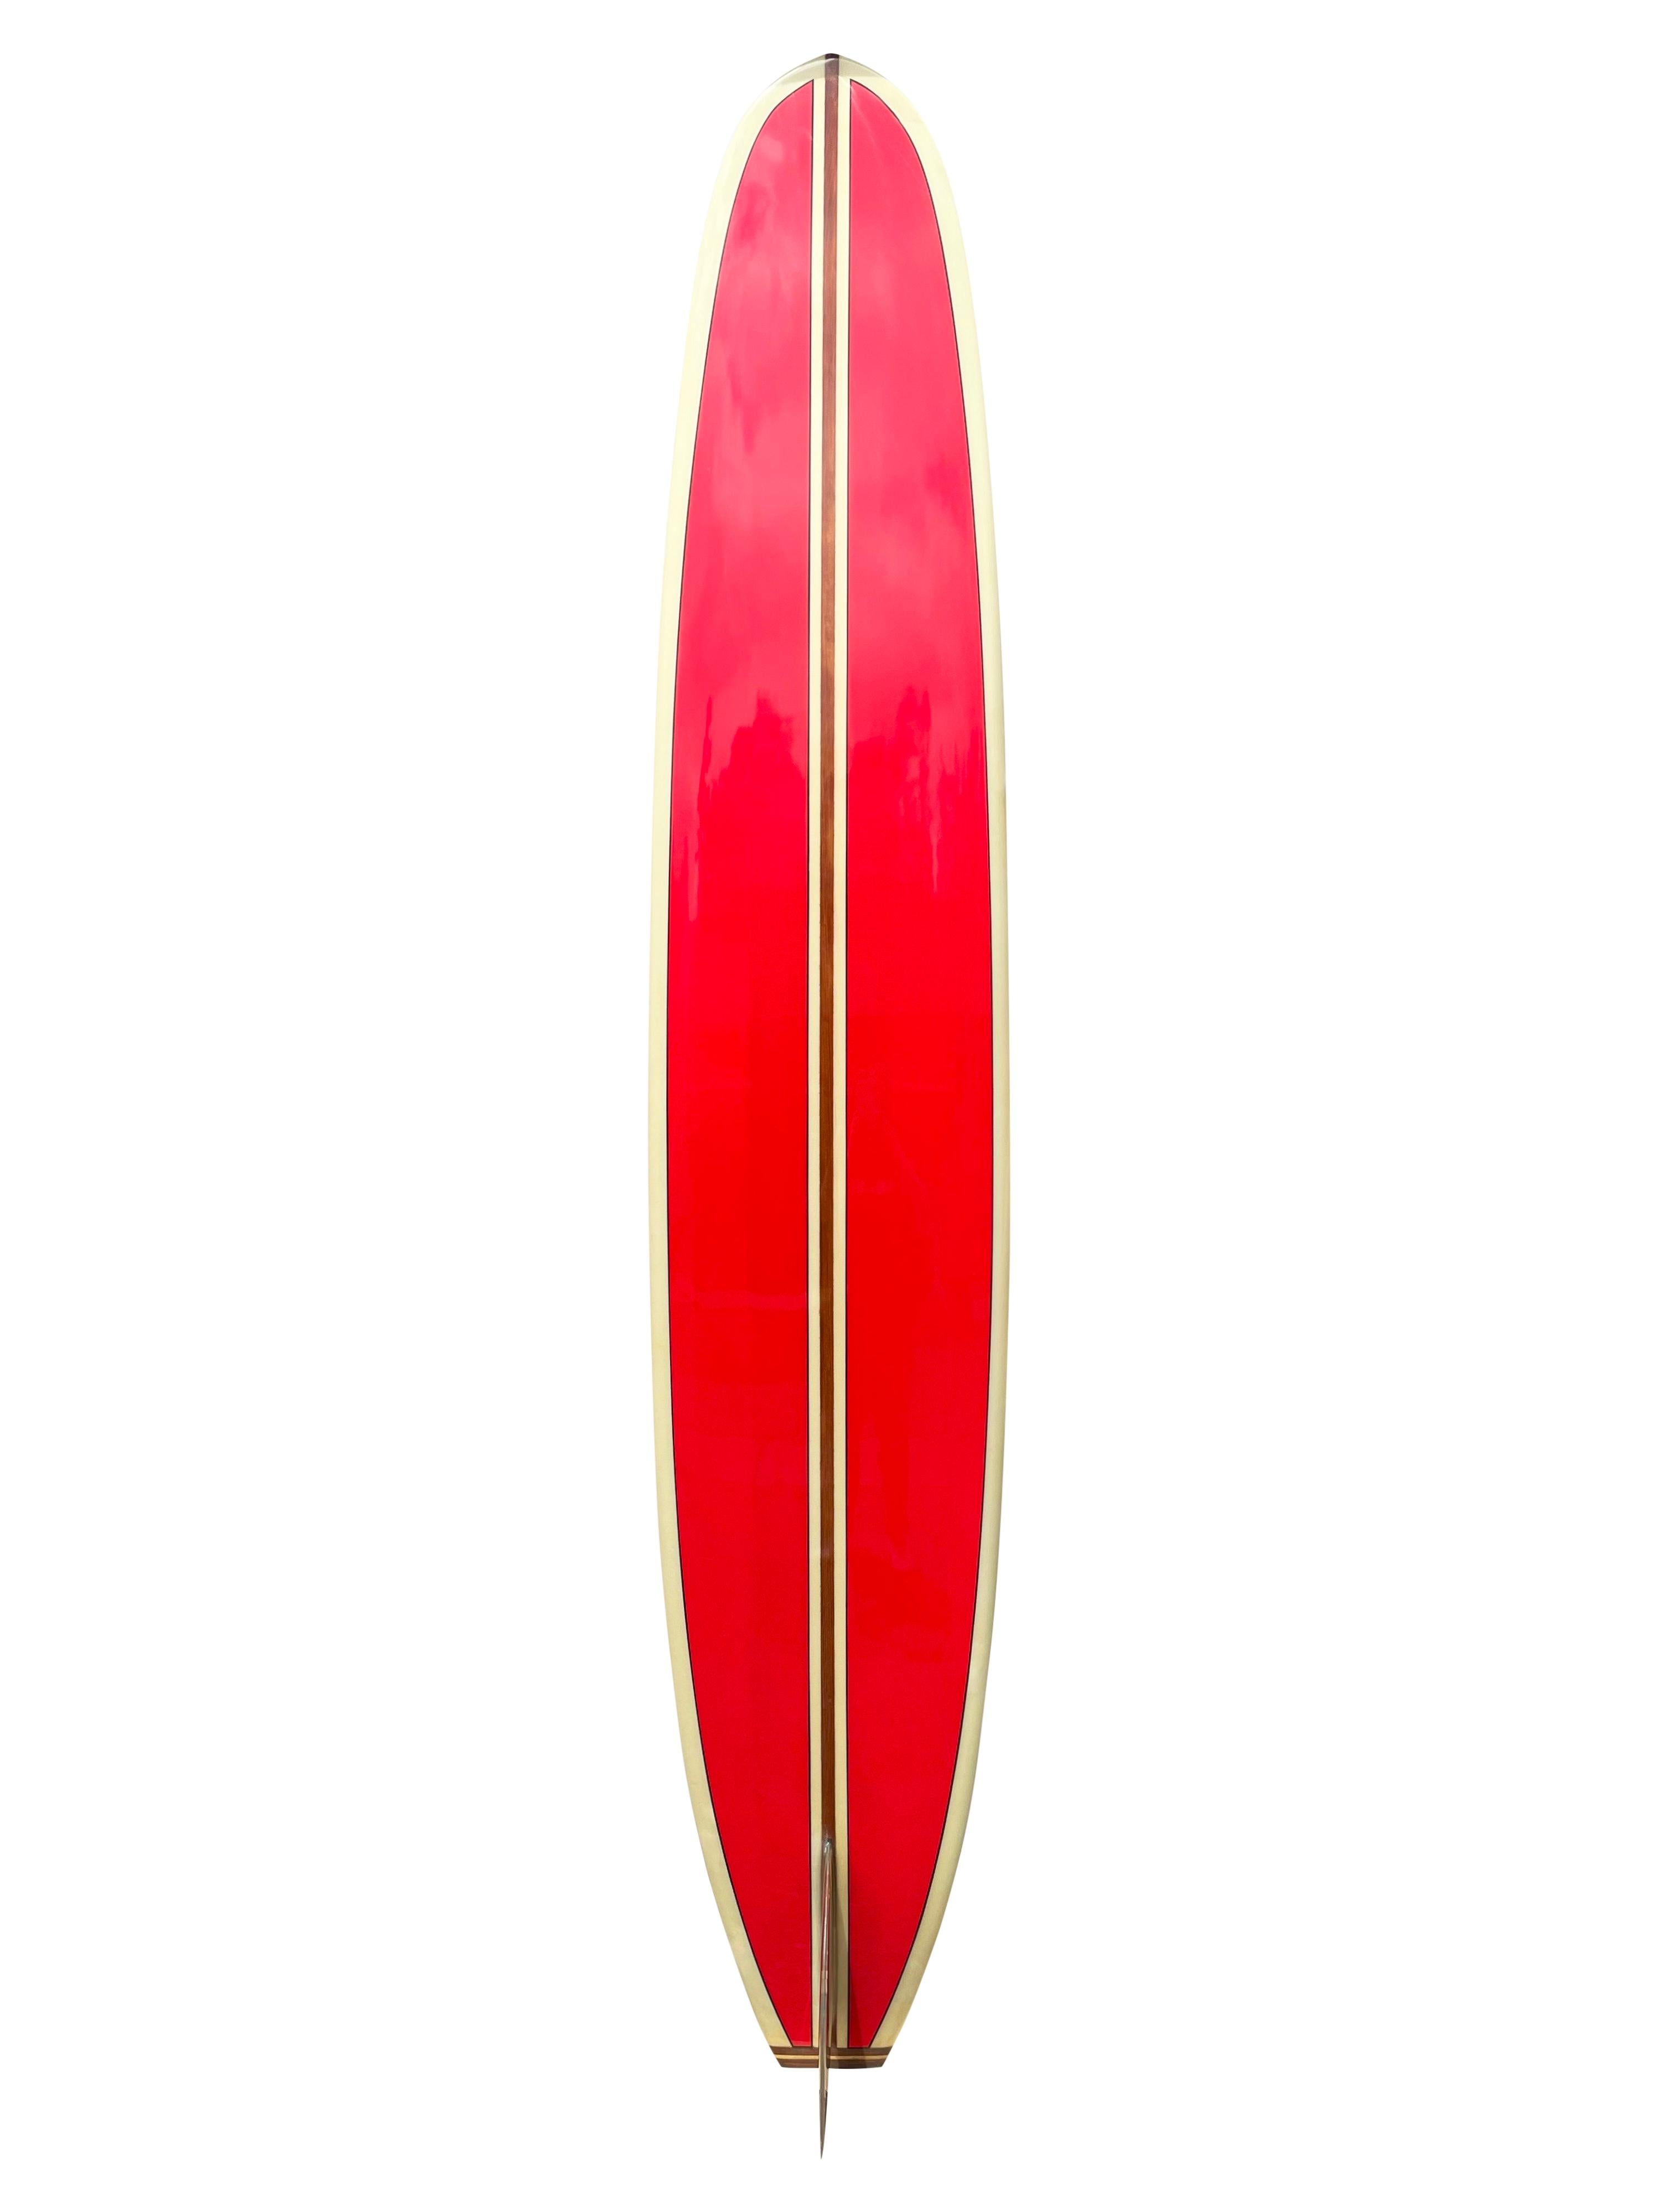 1960s Vintage Greg Noll “S” stringer model longboard. Features beautiful black/red color scheme with unique curved redwood “S” style stringers. Beautiful redwood and balsa Greg Noll signature “chopstick” fin complete with wood tailblock. Shaped